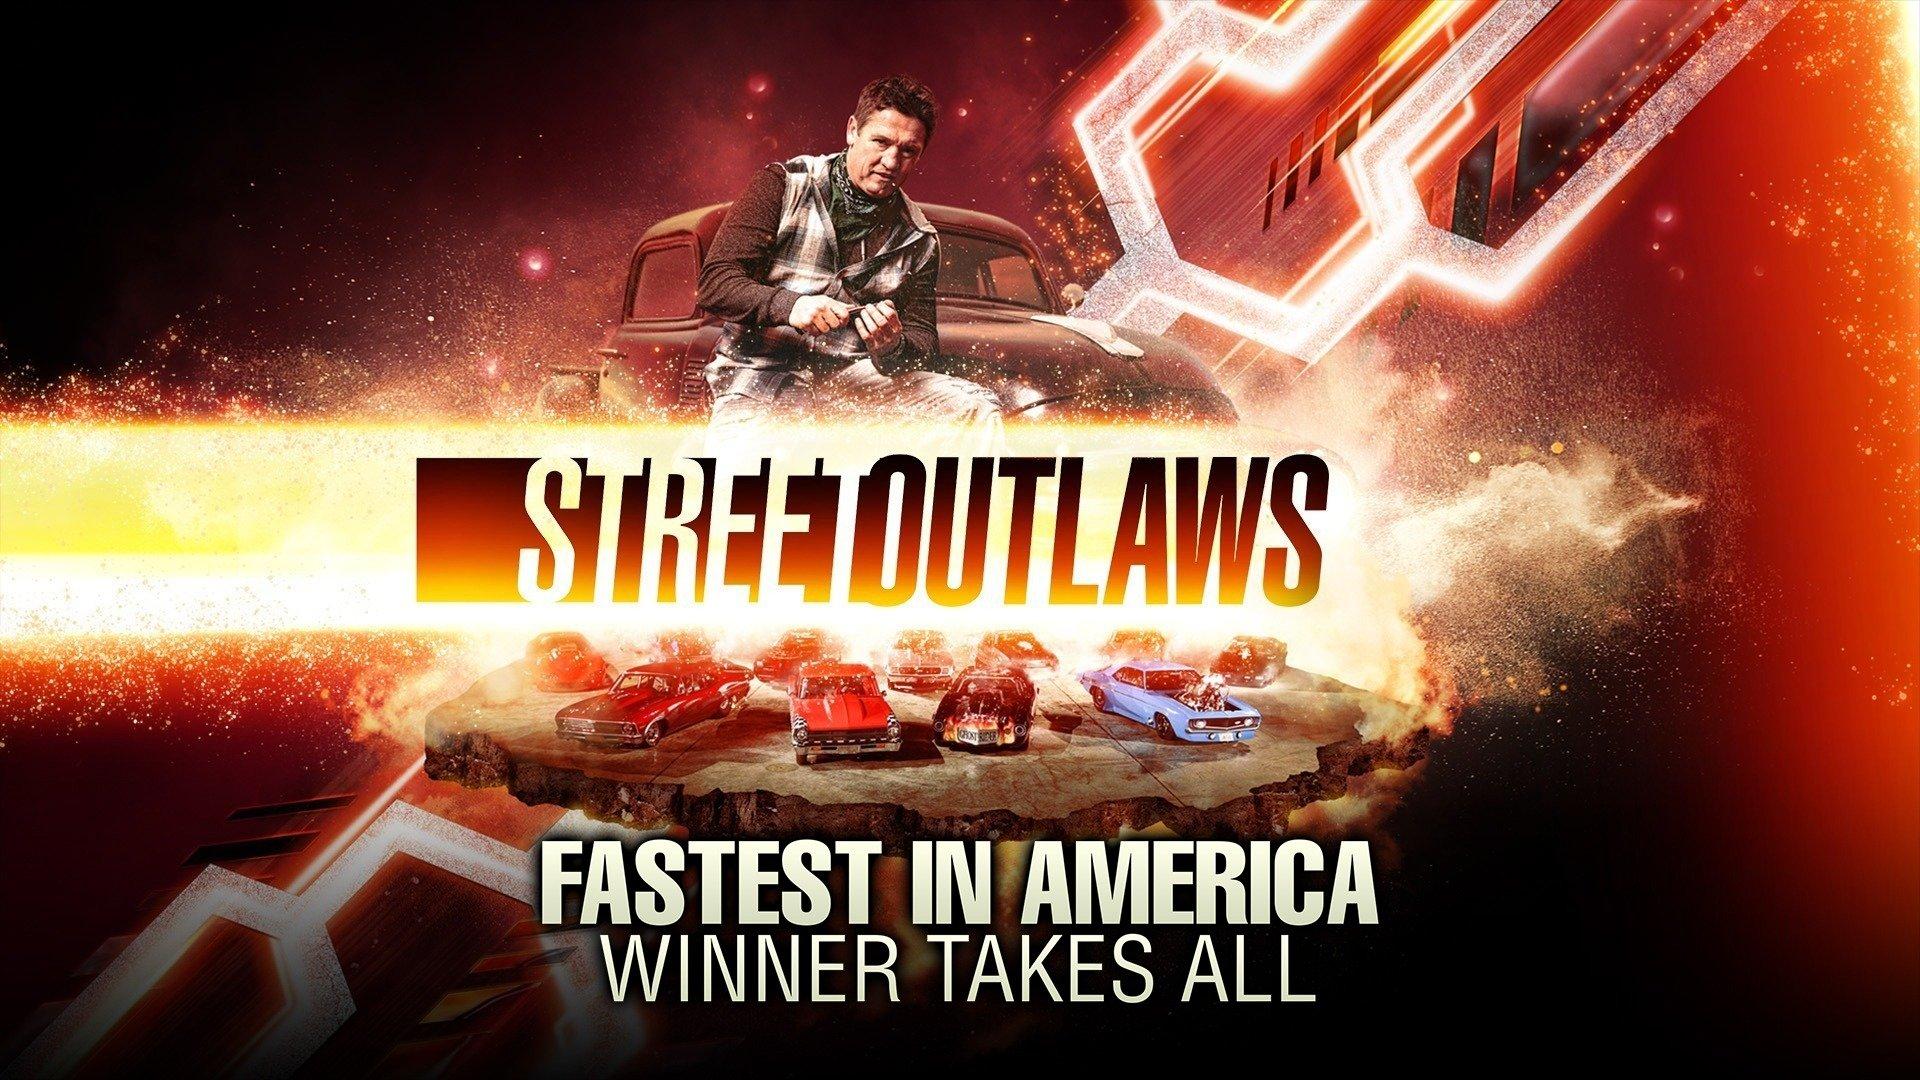 Street Outlaws Fastest in America Winner Takes All